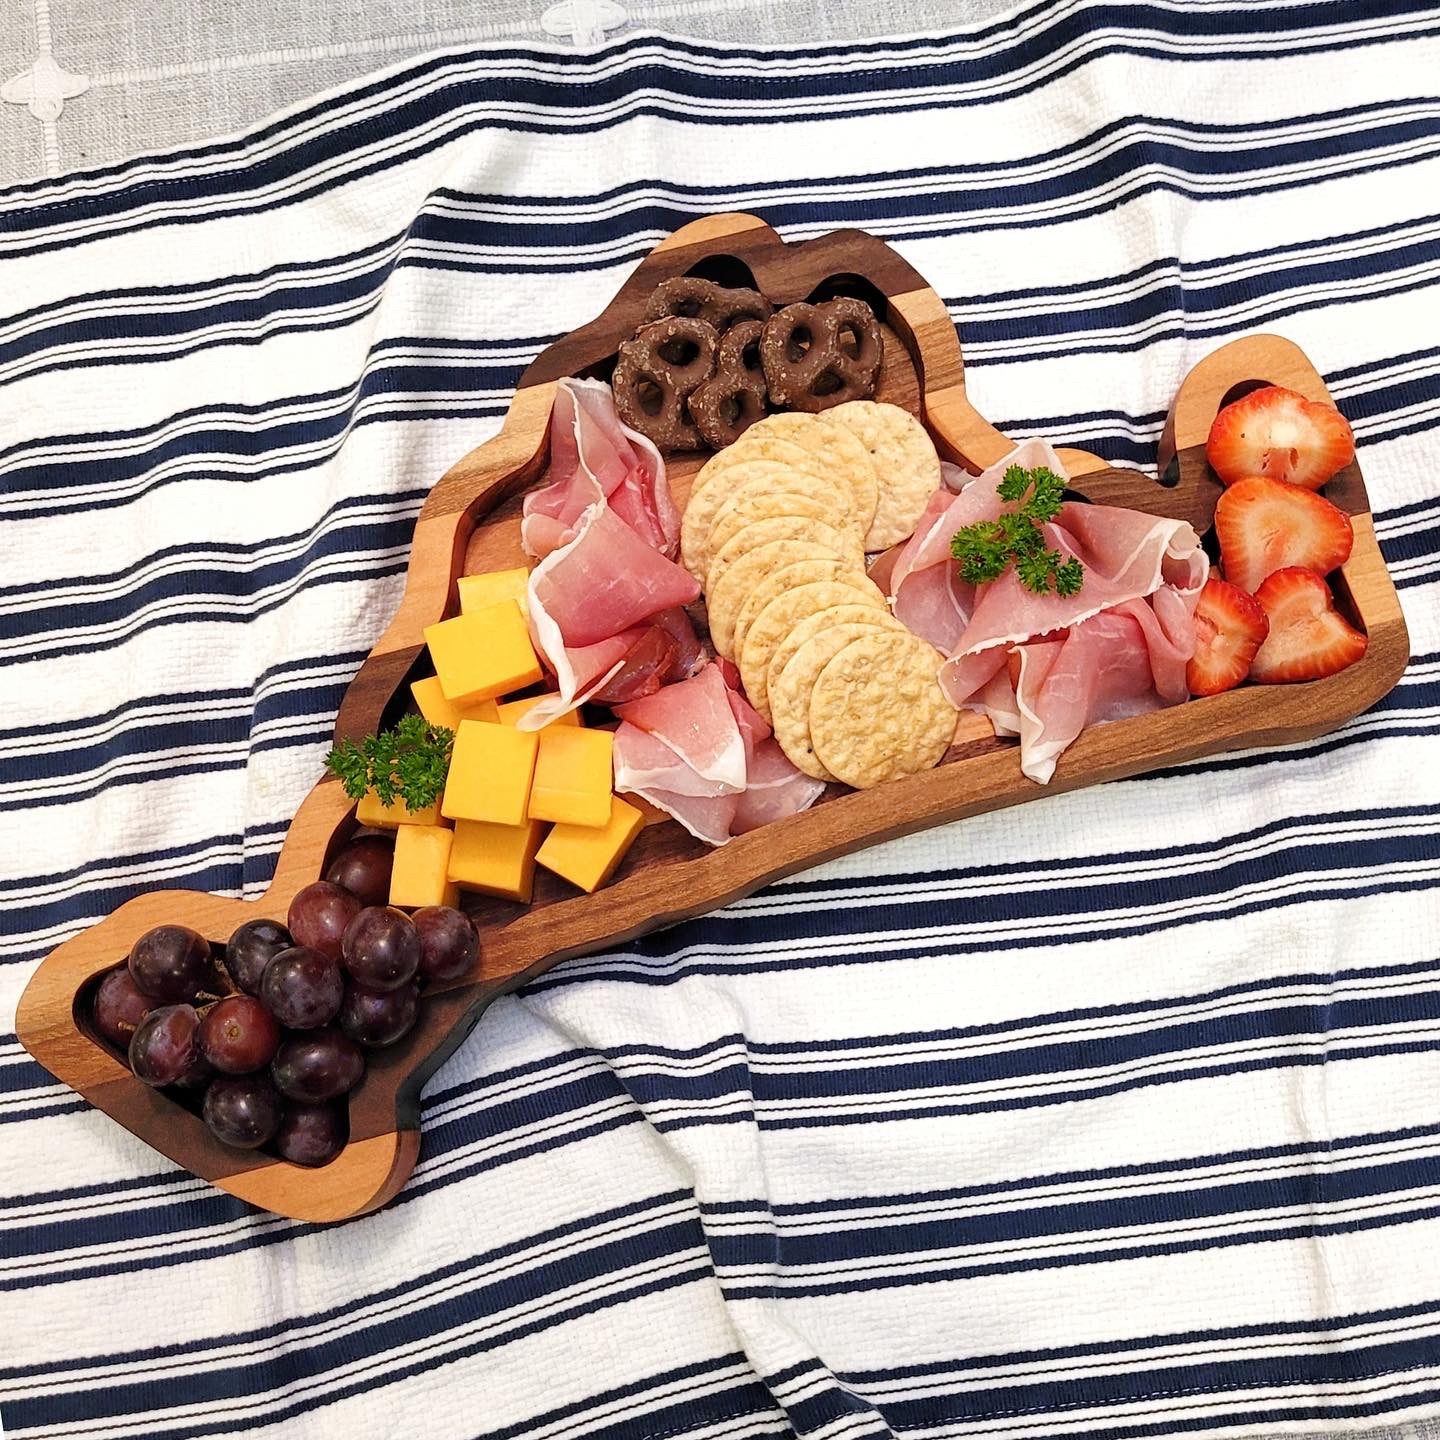 Martha's Vineyard charcuterie board filled with delicious food